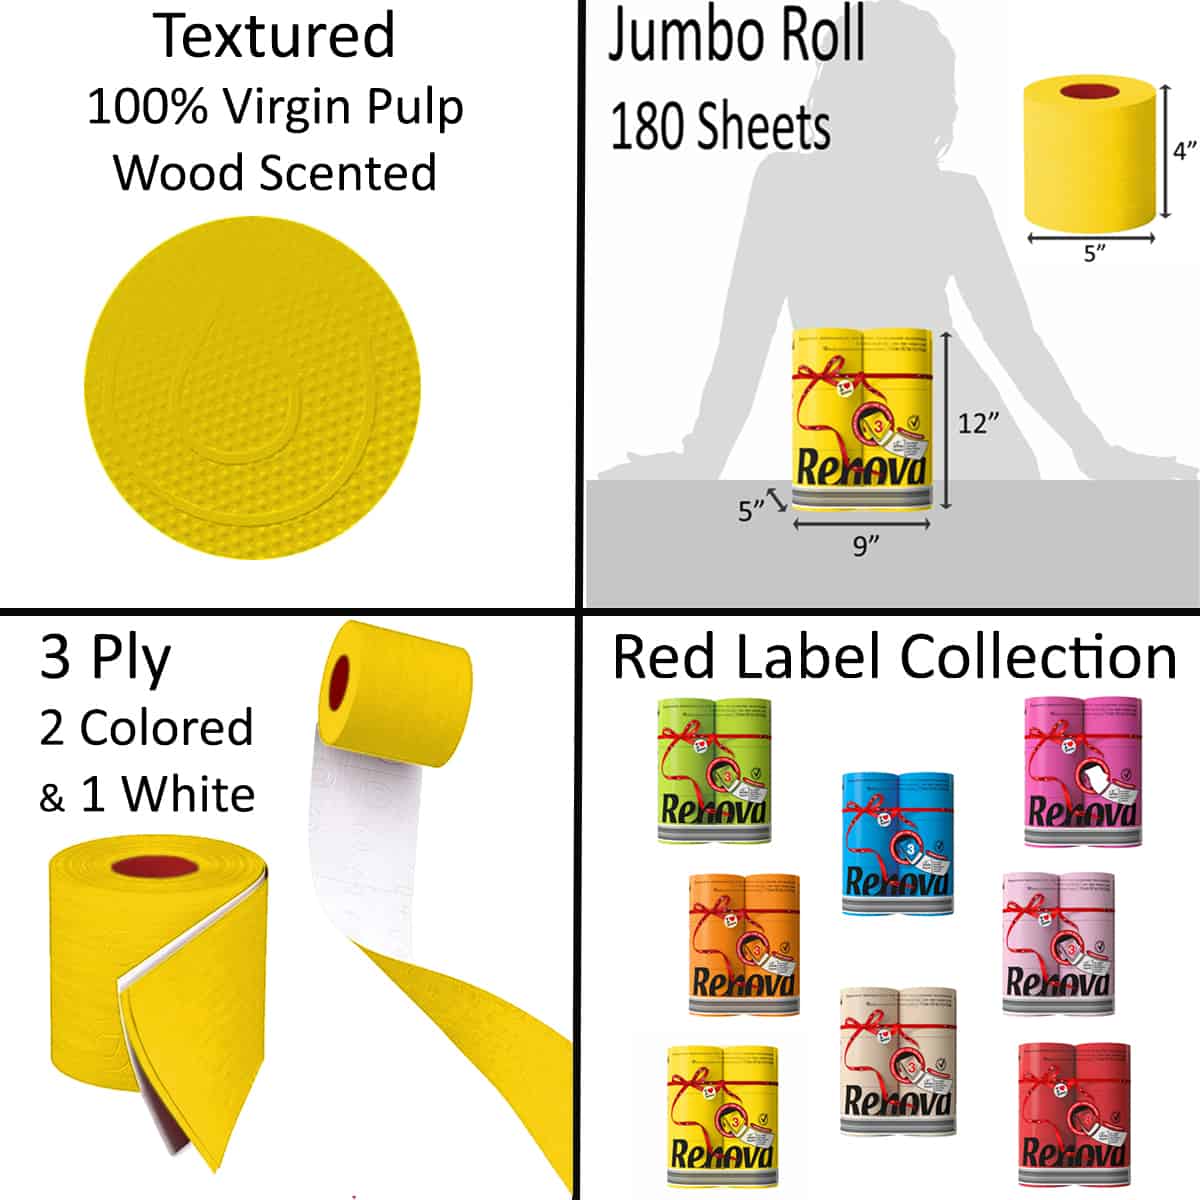 Luxury Scented Colored Toilet Paper 6 Jumbo Rolls 3-Ply-180 Sheets Box 12 packs-72R